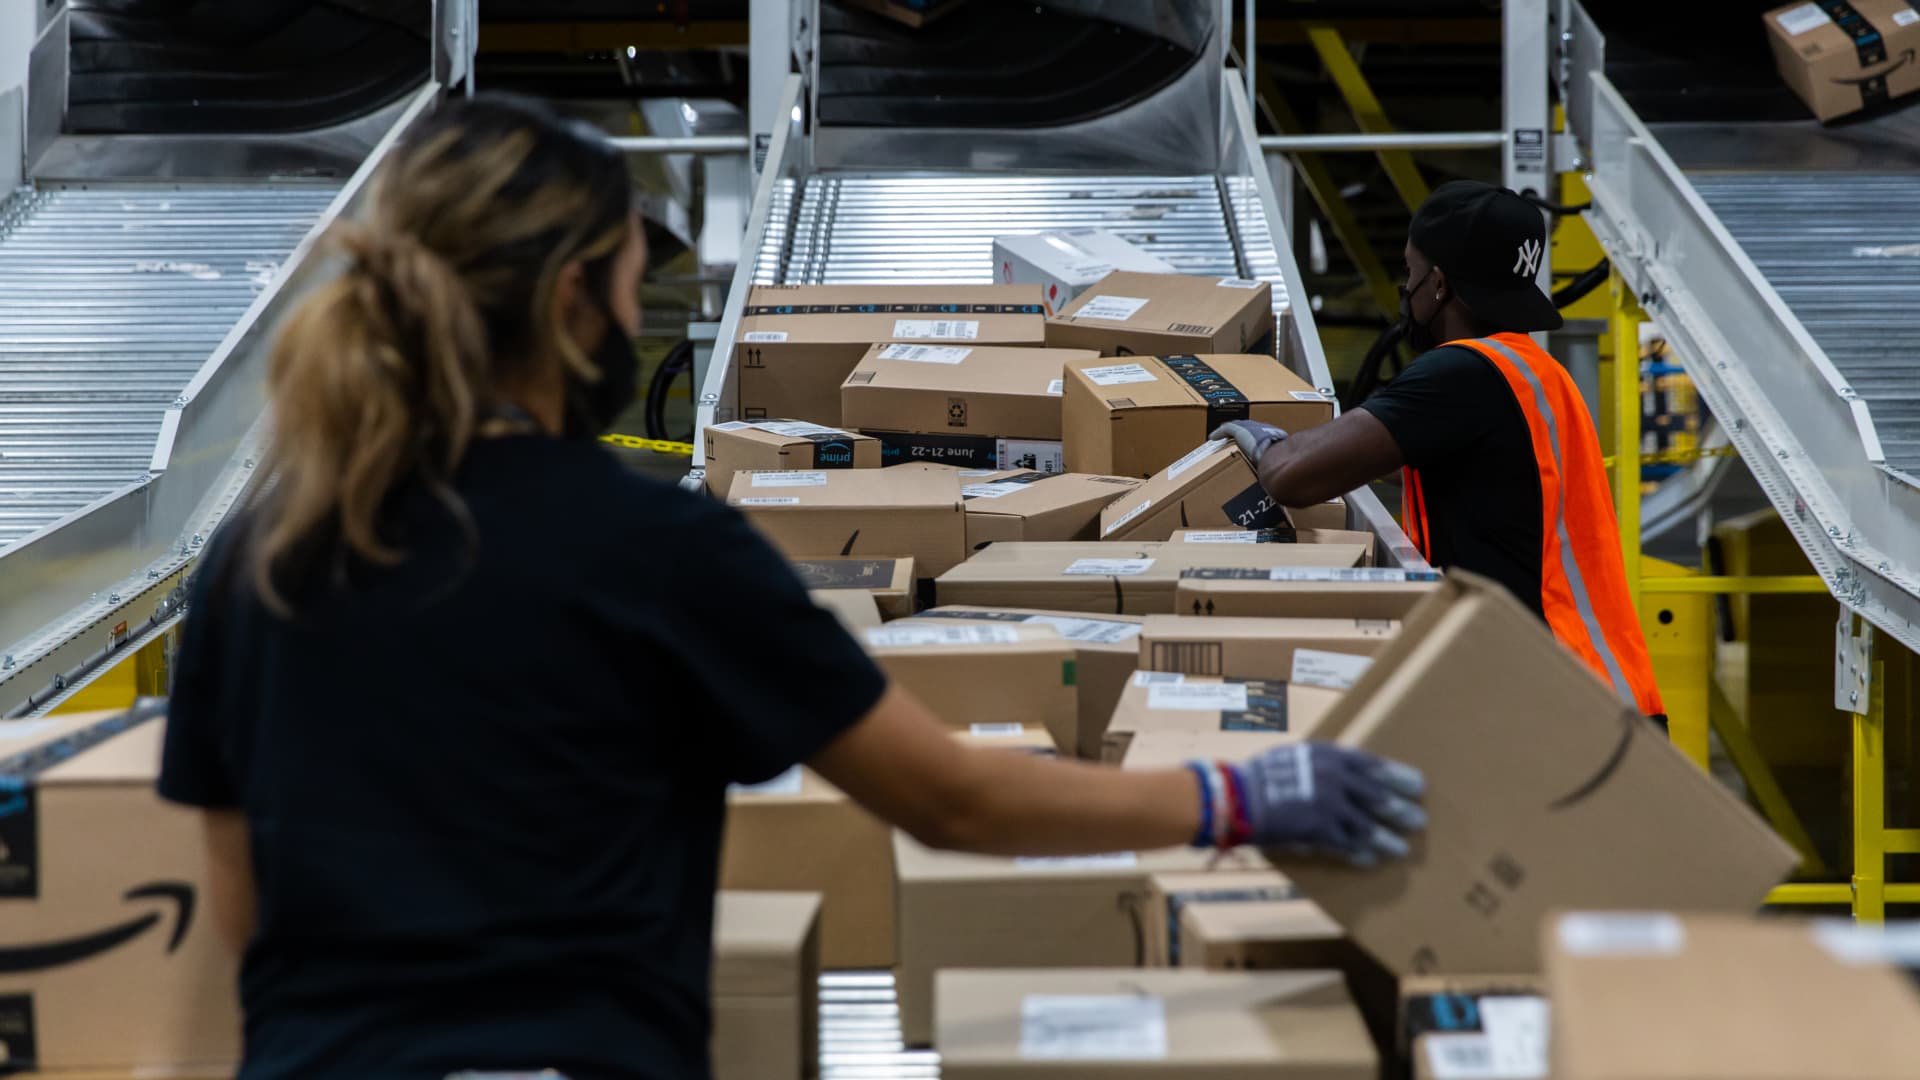 Amazon’s second Prime Day sale will take place Oct